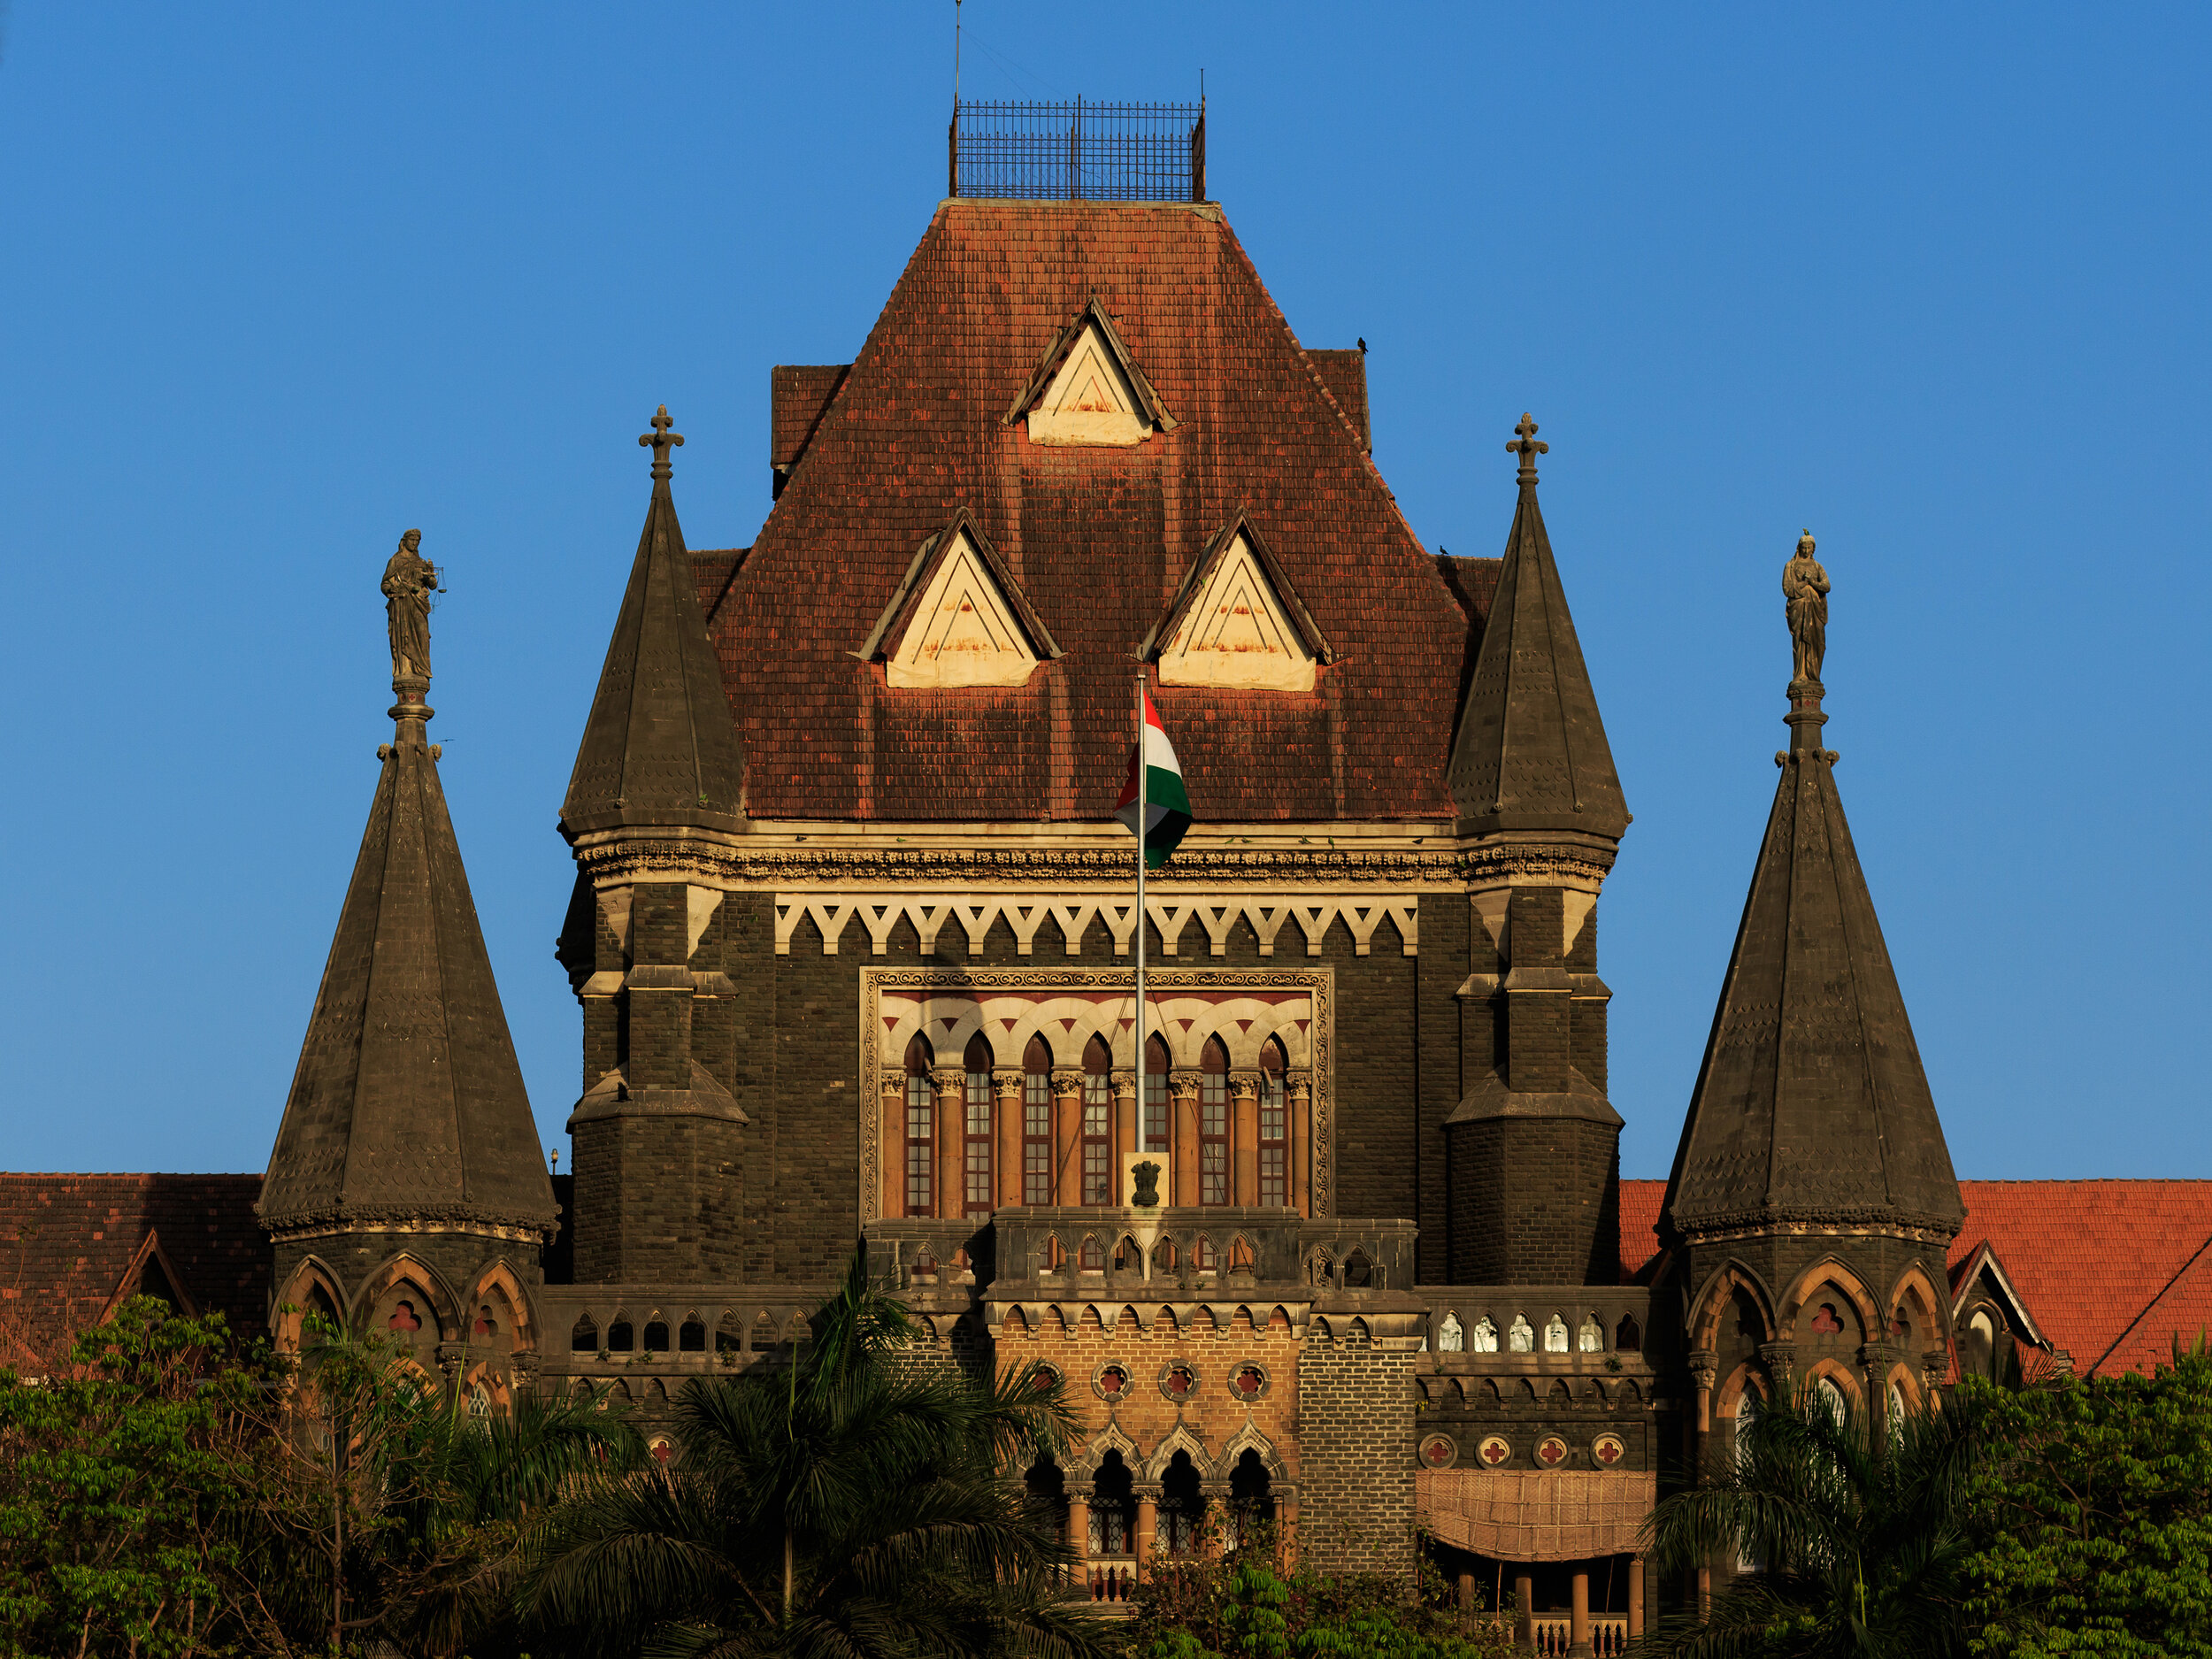 Indian Courts - Image credit: https://en.wikipedia.org/wiki/High_courts_of_India#/media/File:Mumbai_03-2016_40_Bombay_High_Court.jpg